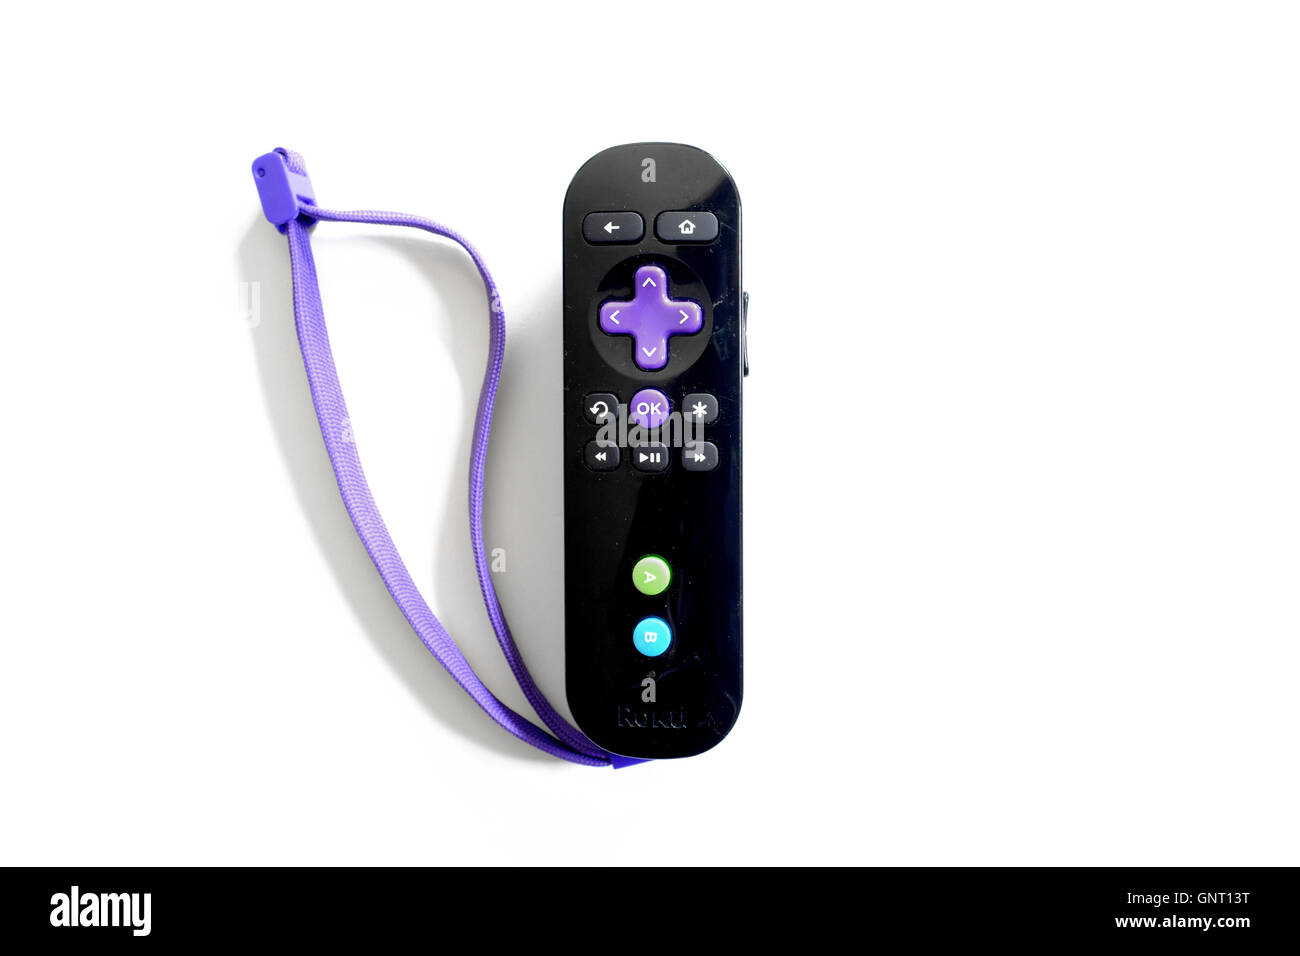 A Roku 3 remote control photographed against a white background. Stock Photo